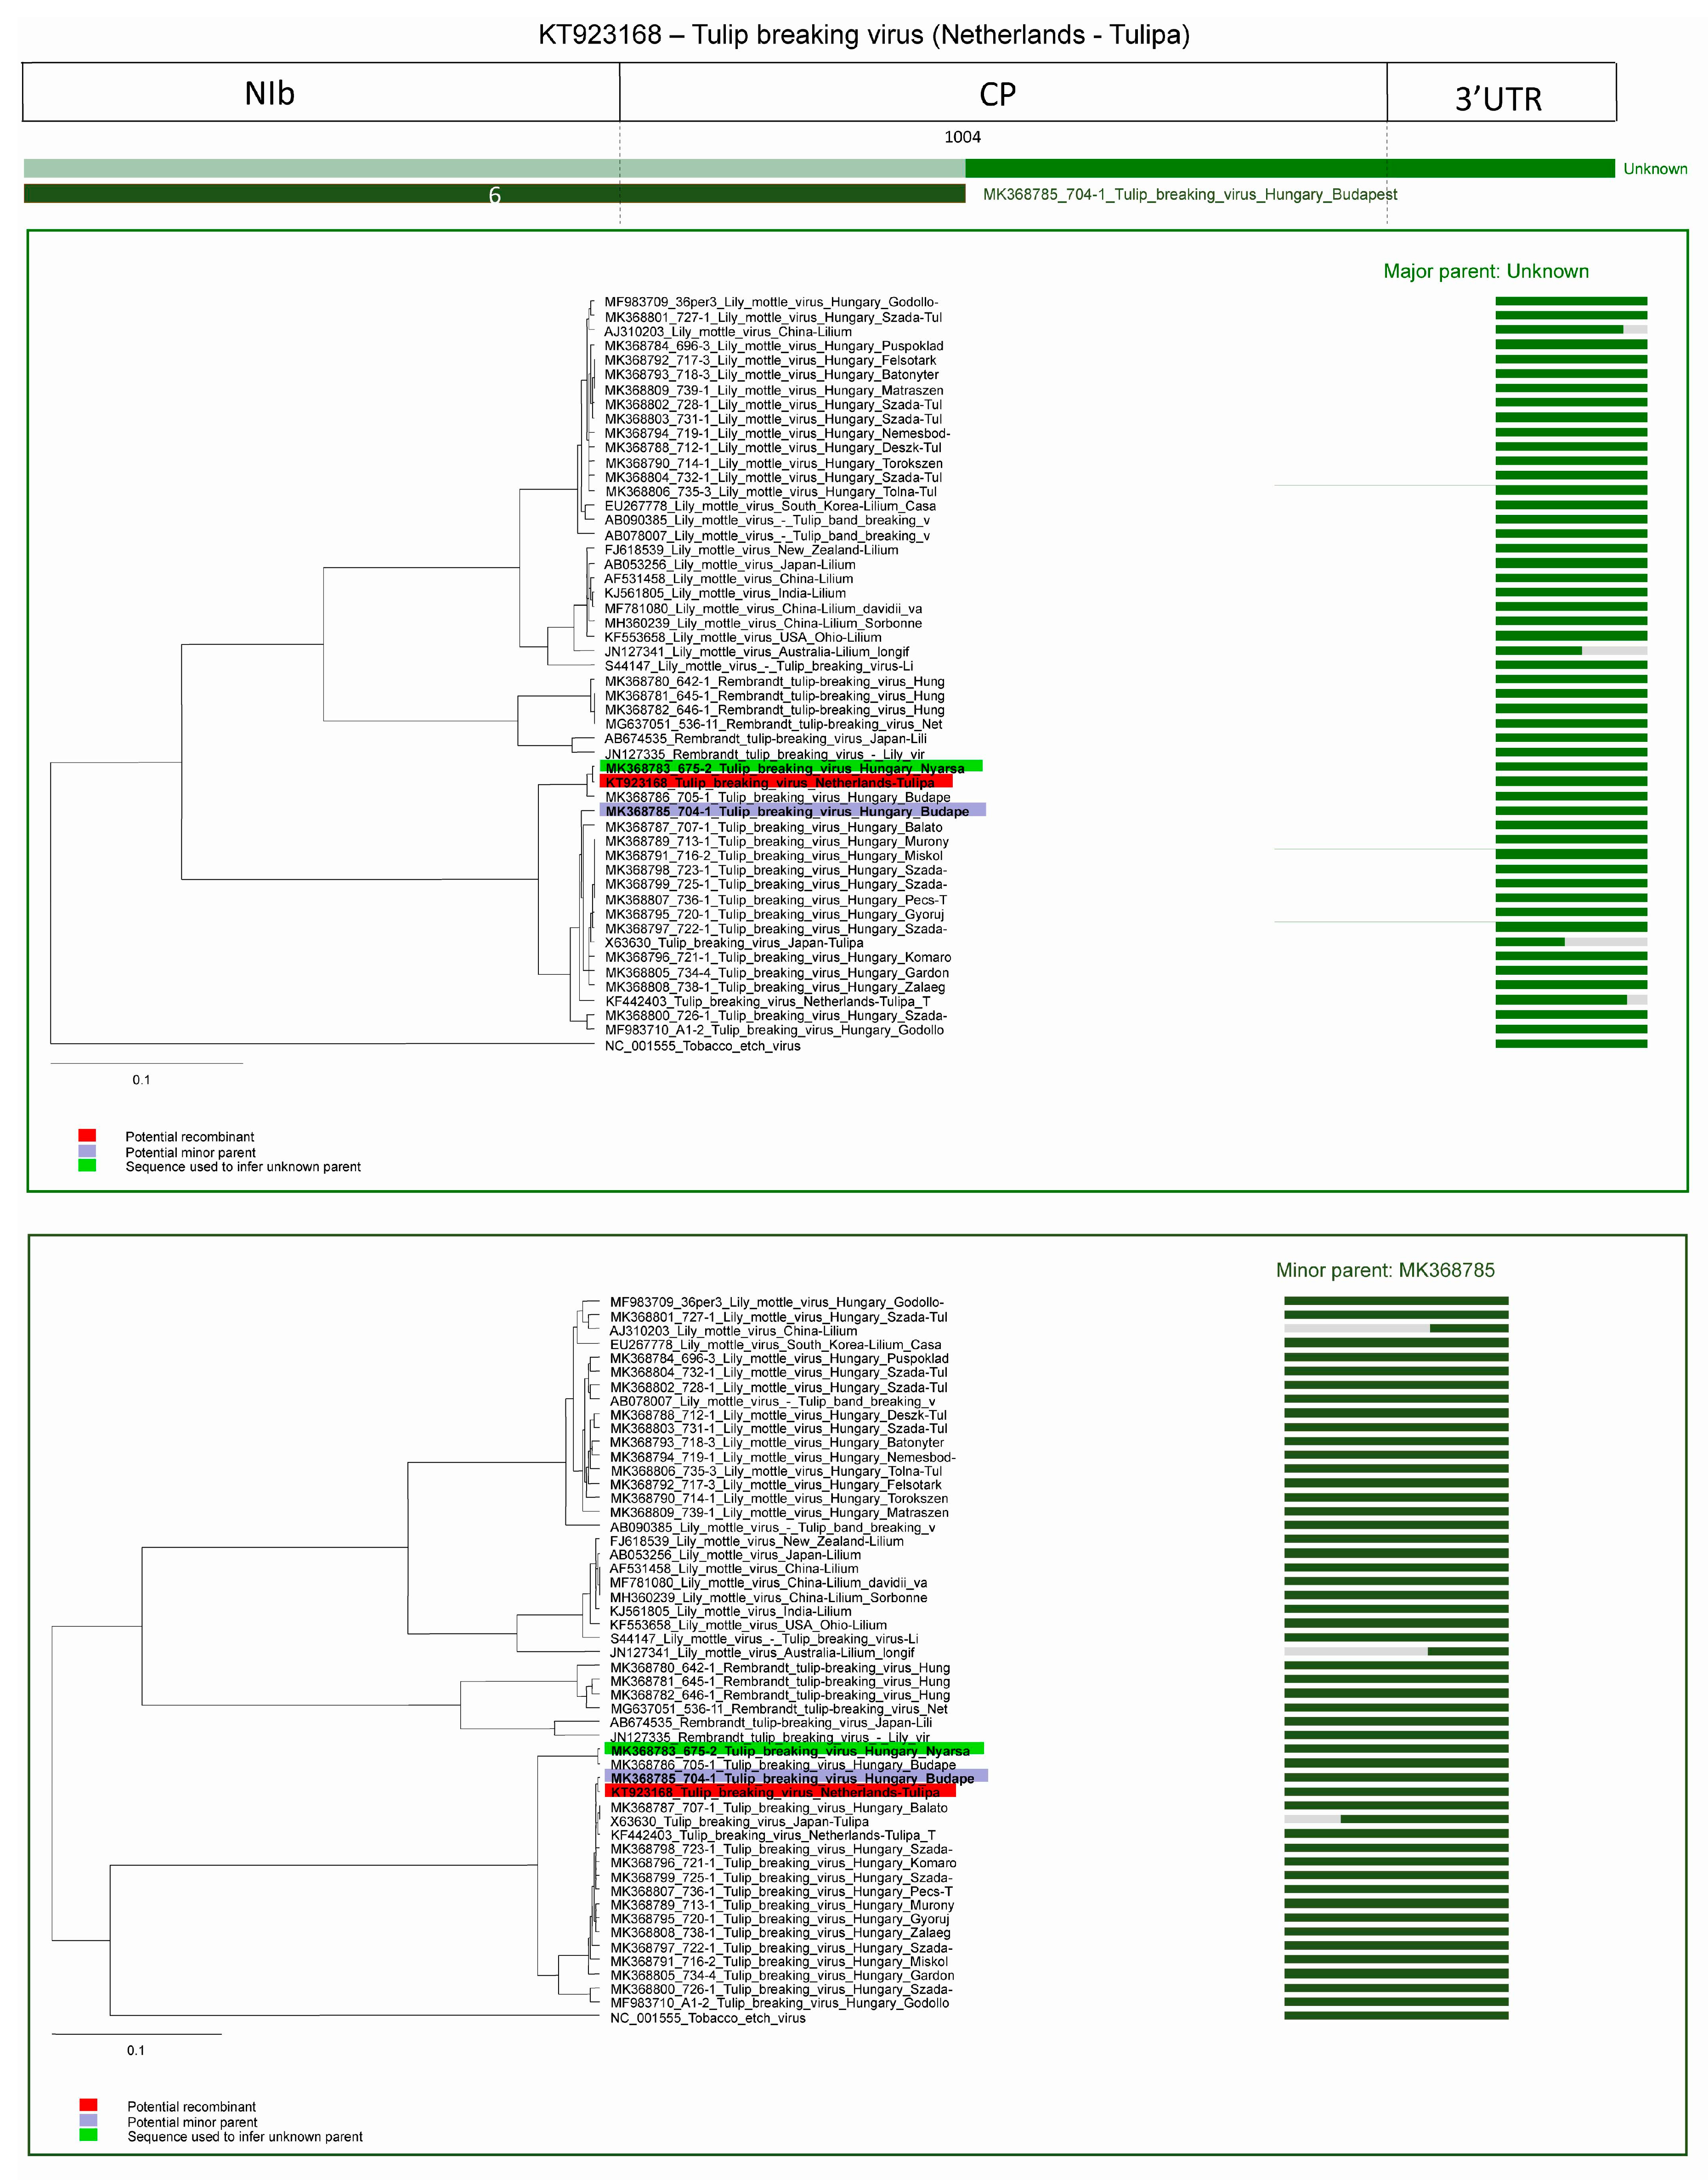 Plants | Free Full-Text | Genetic Diversity of Potyviruses Associated with  Tulip Breaking Syndrome | HTML